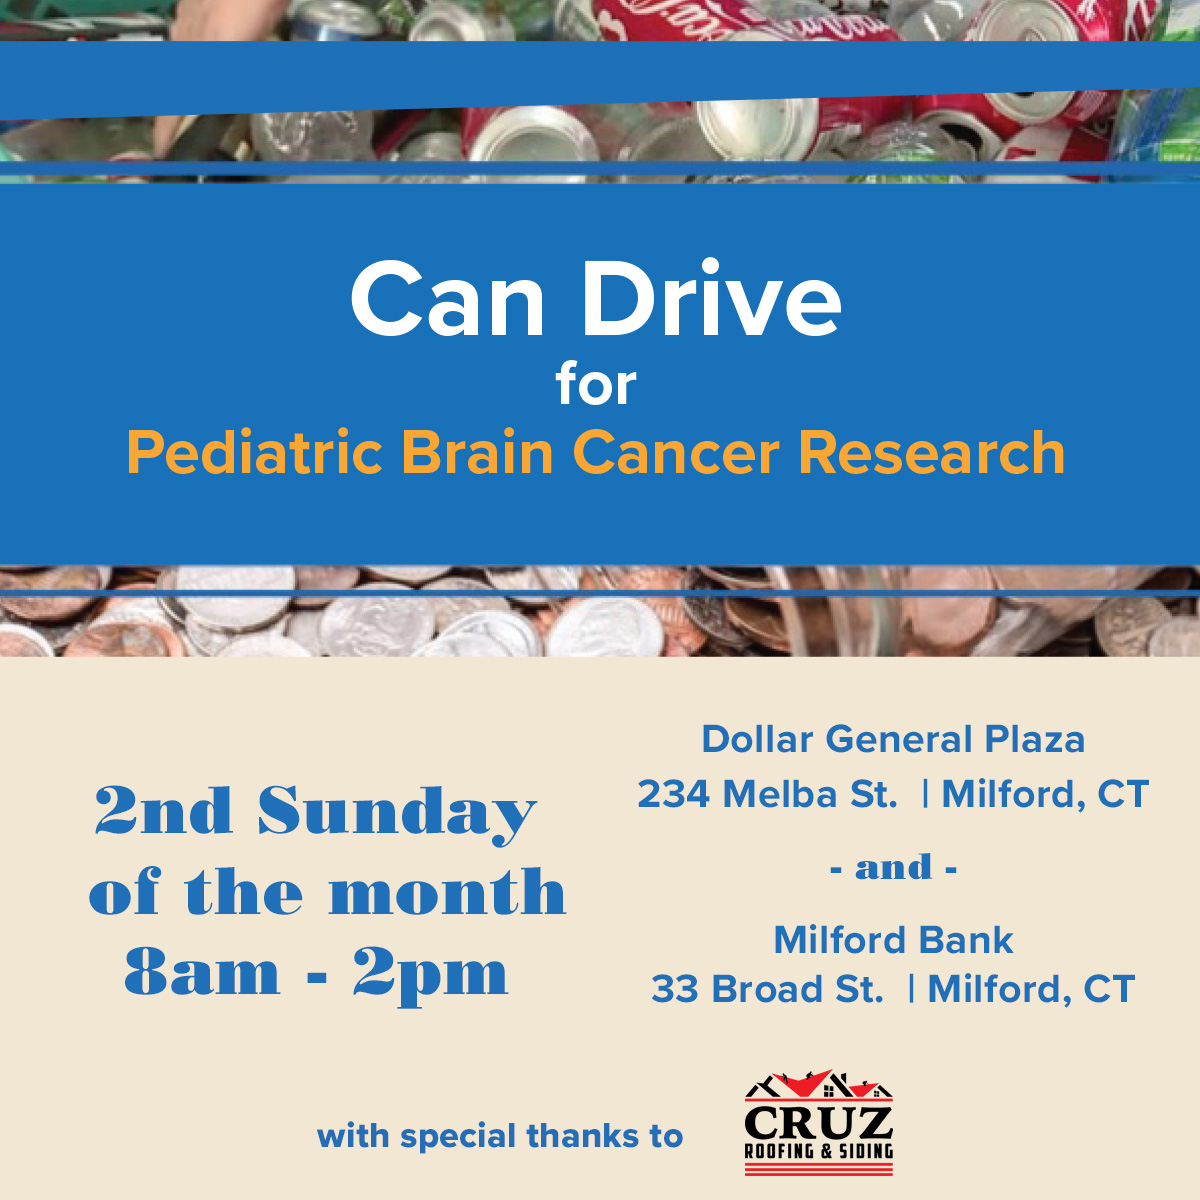 Can Drive for Pediatric Brain Cancer Research